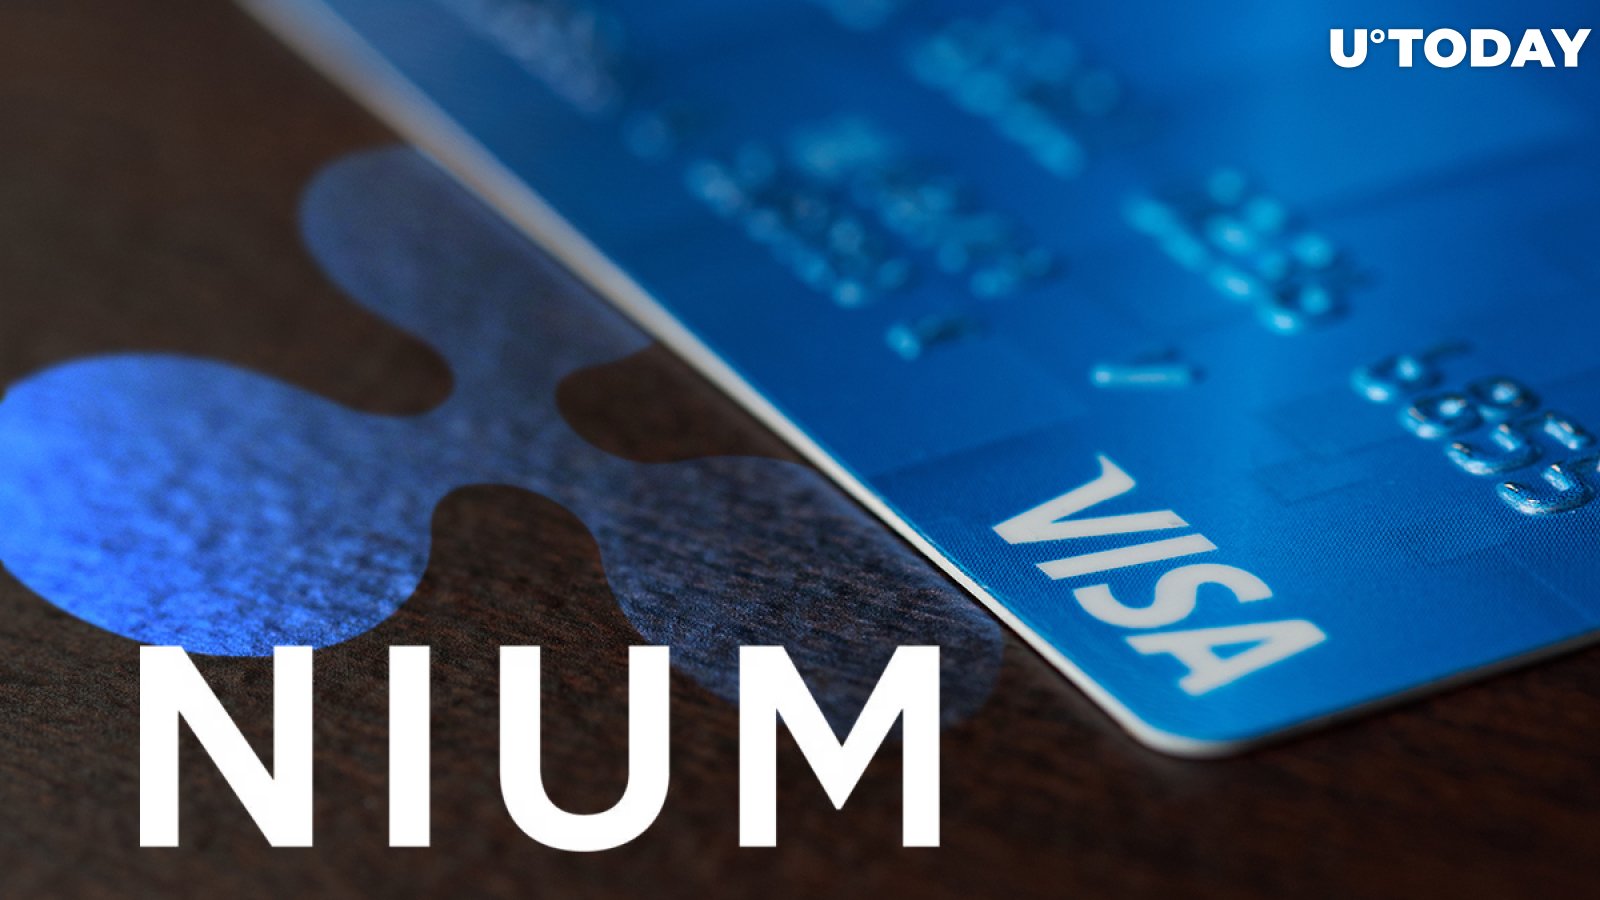 Ripple-Powered Nium Will Help Aspire Issue Virtual Visa Cards Integrated with Google Pay